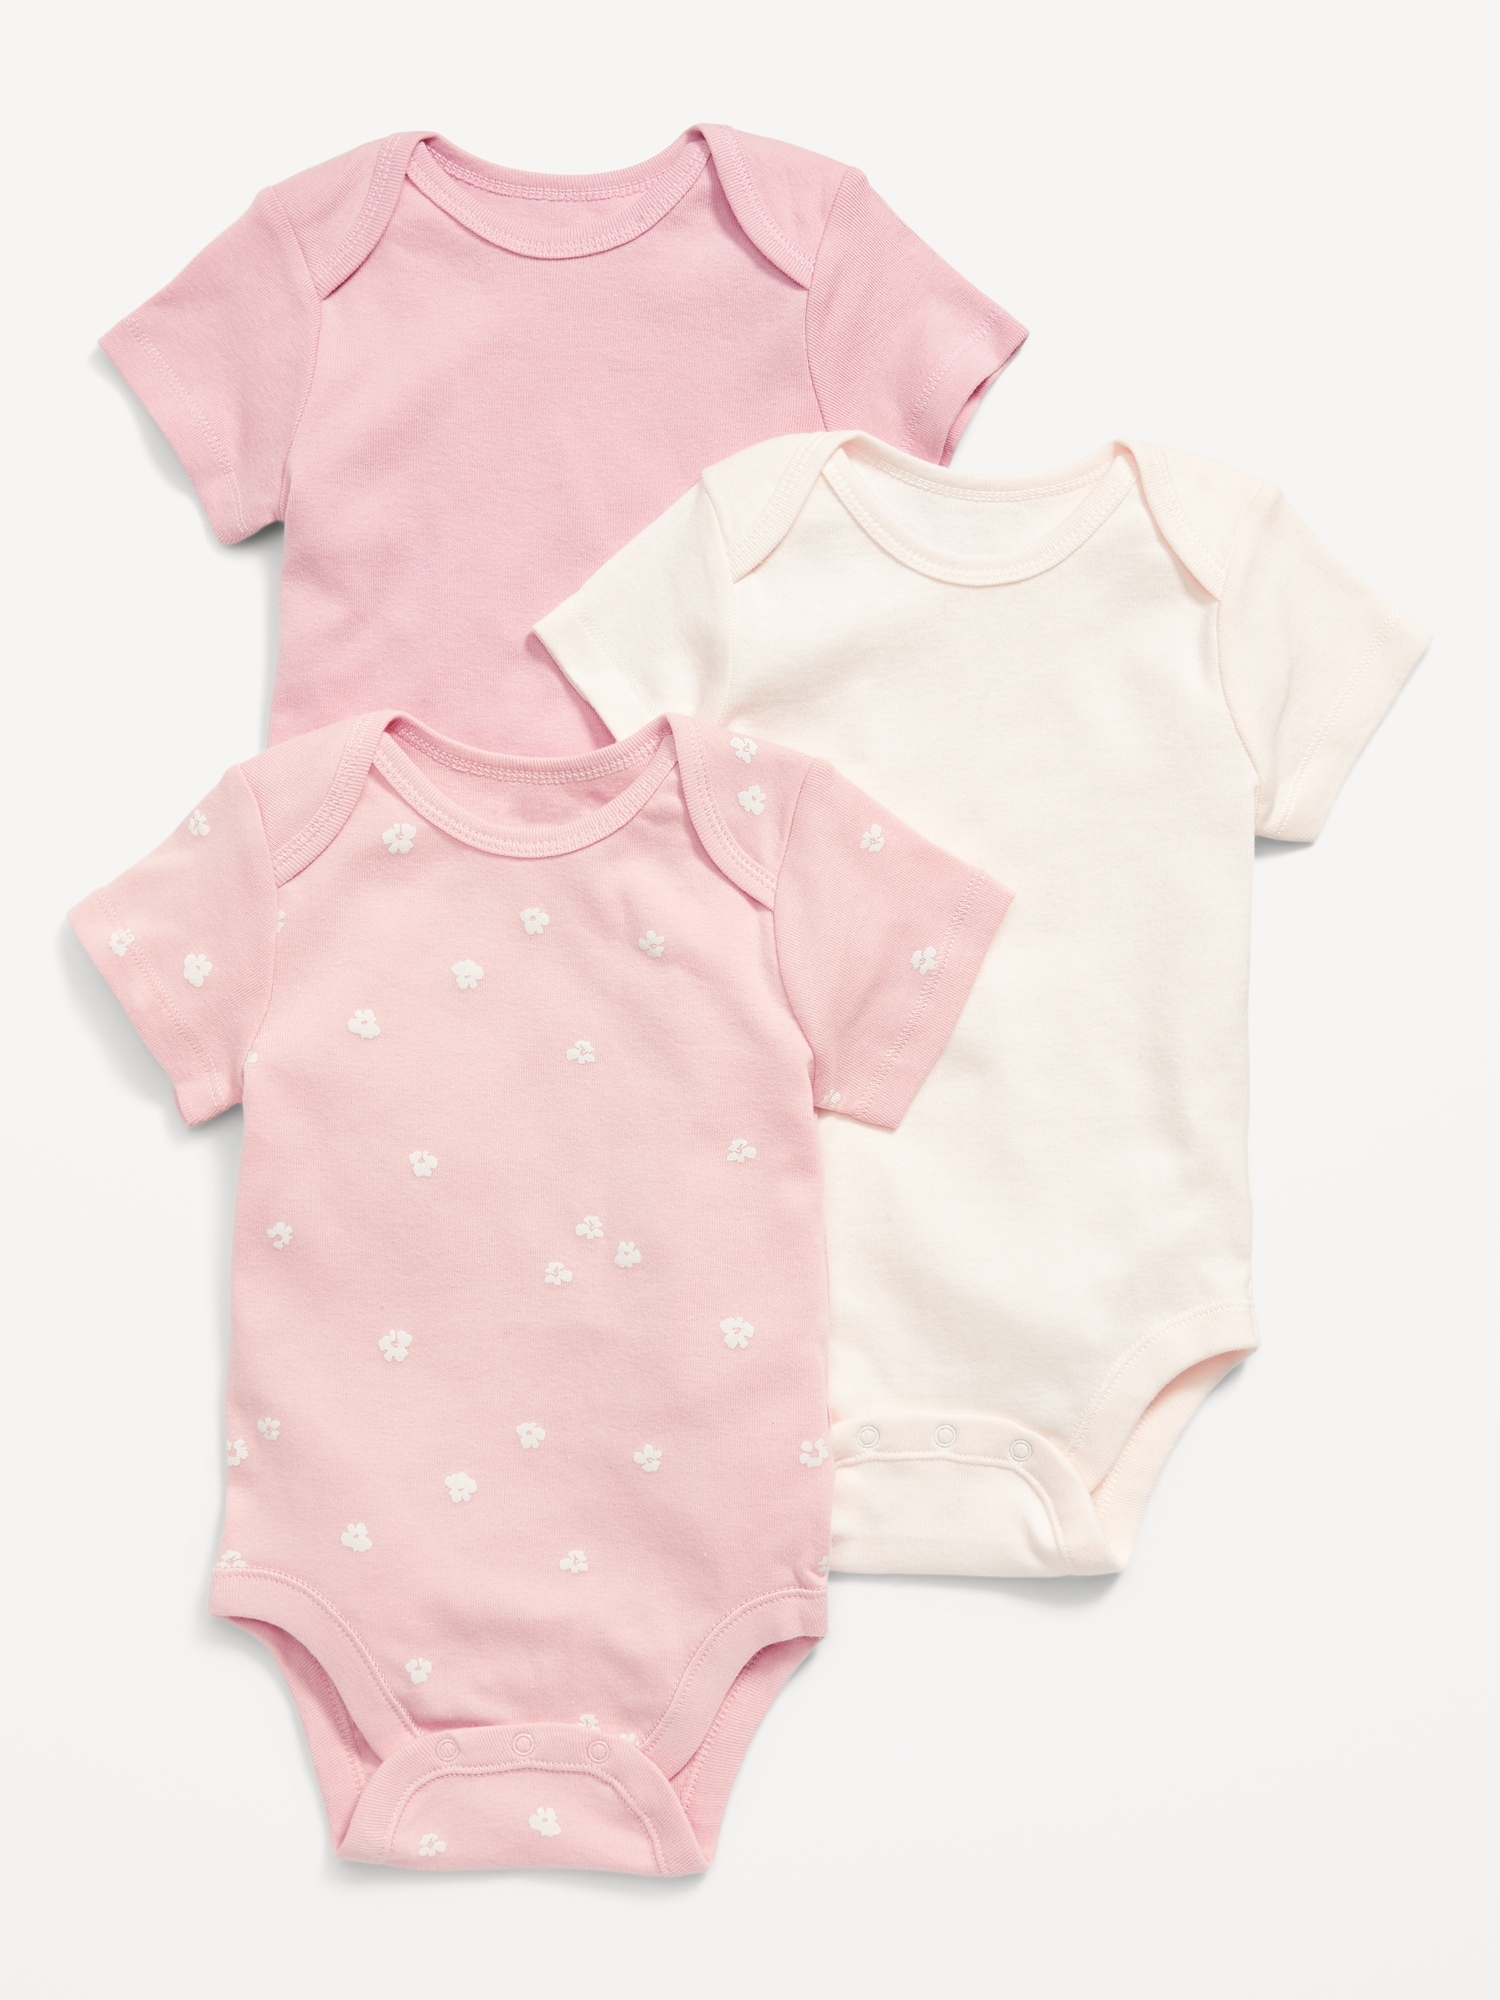 Old Navy Unisex Bodysuit 3-Pack for Baby pink. 1